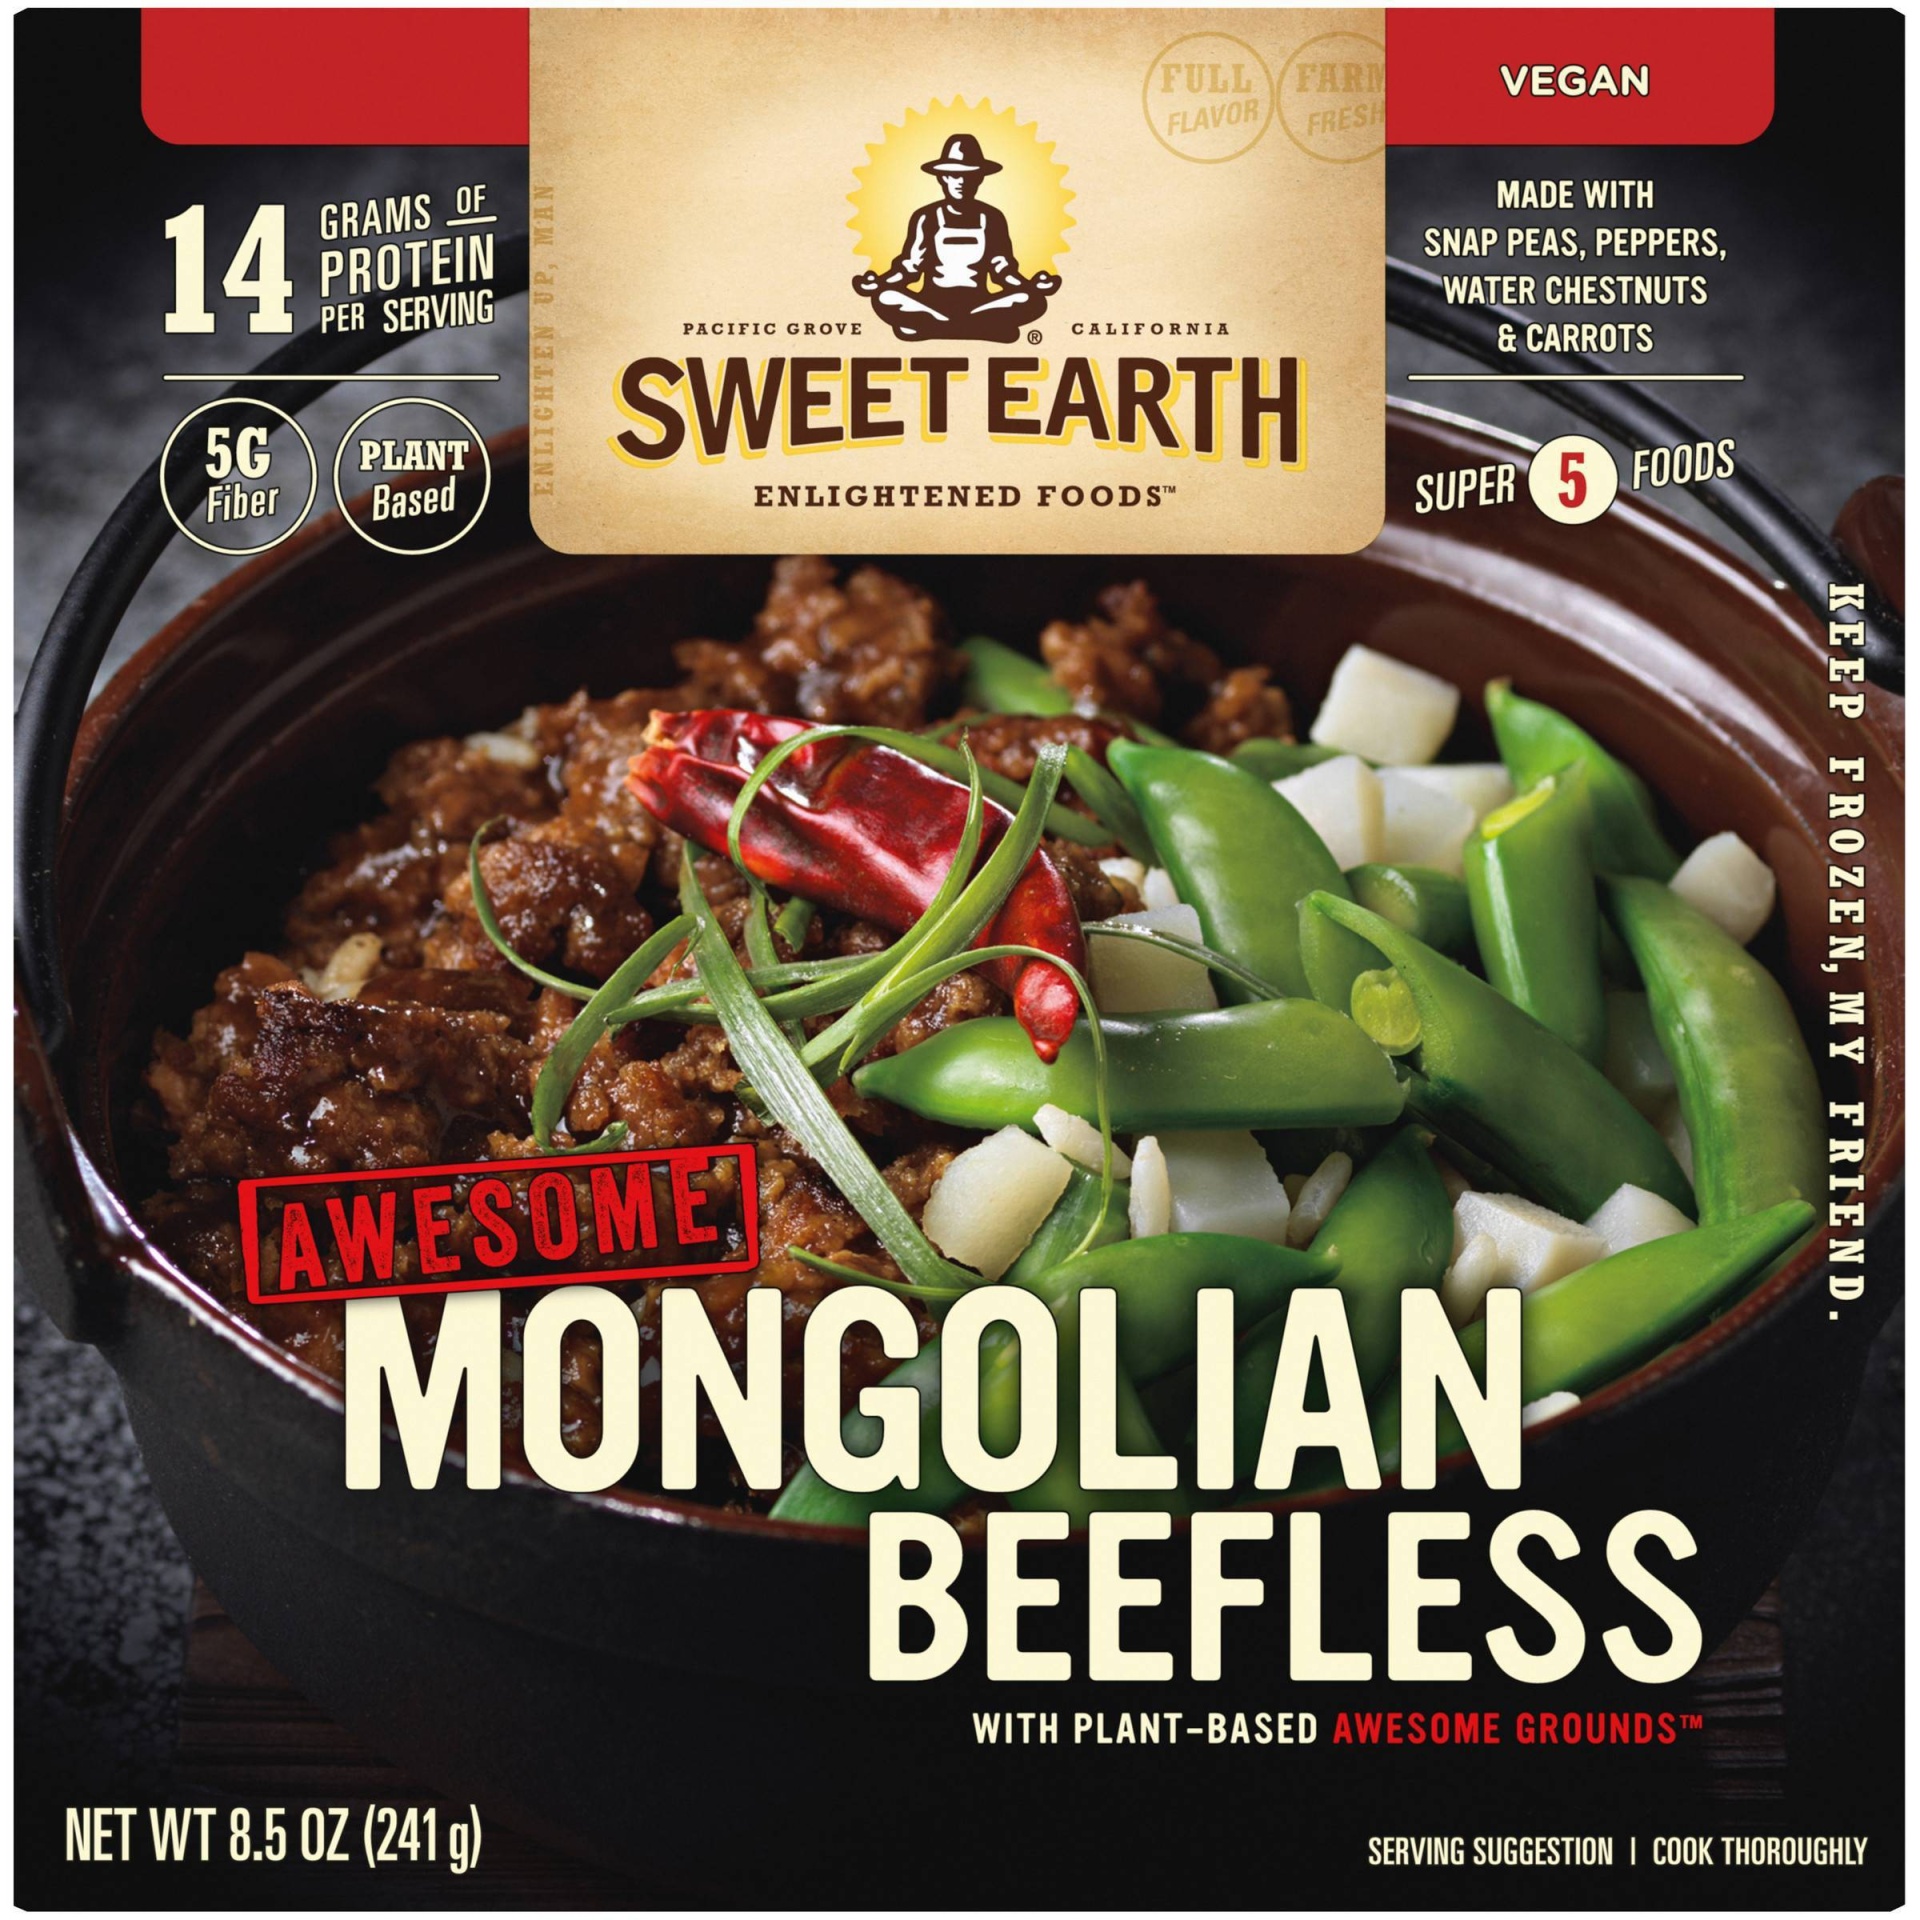 slide 1 of 7, SWEET EARTH NATURAL FOODS Sweet Earth Frozen Vegan Awesome Mongolian Beefless Bowl, 8.5 oz